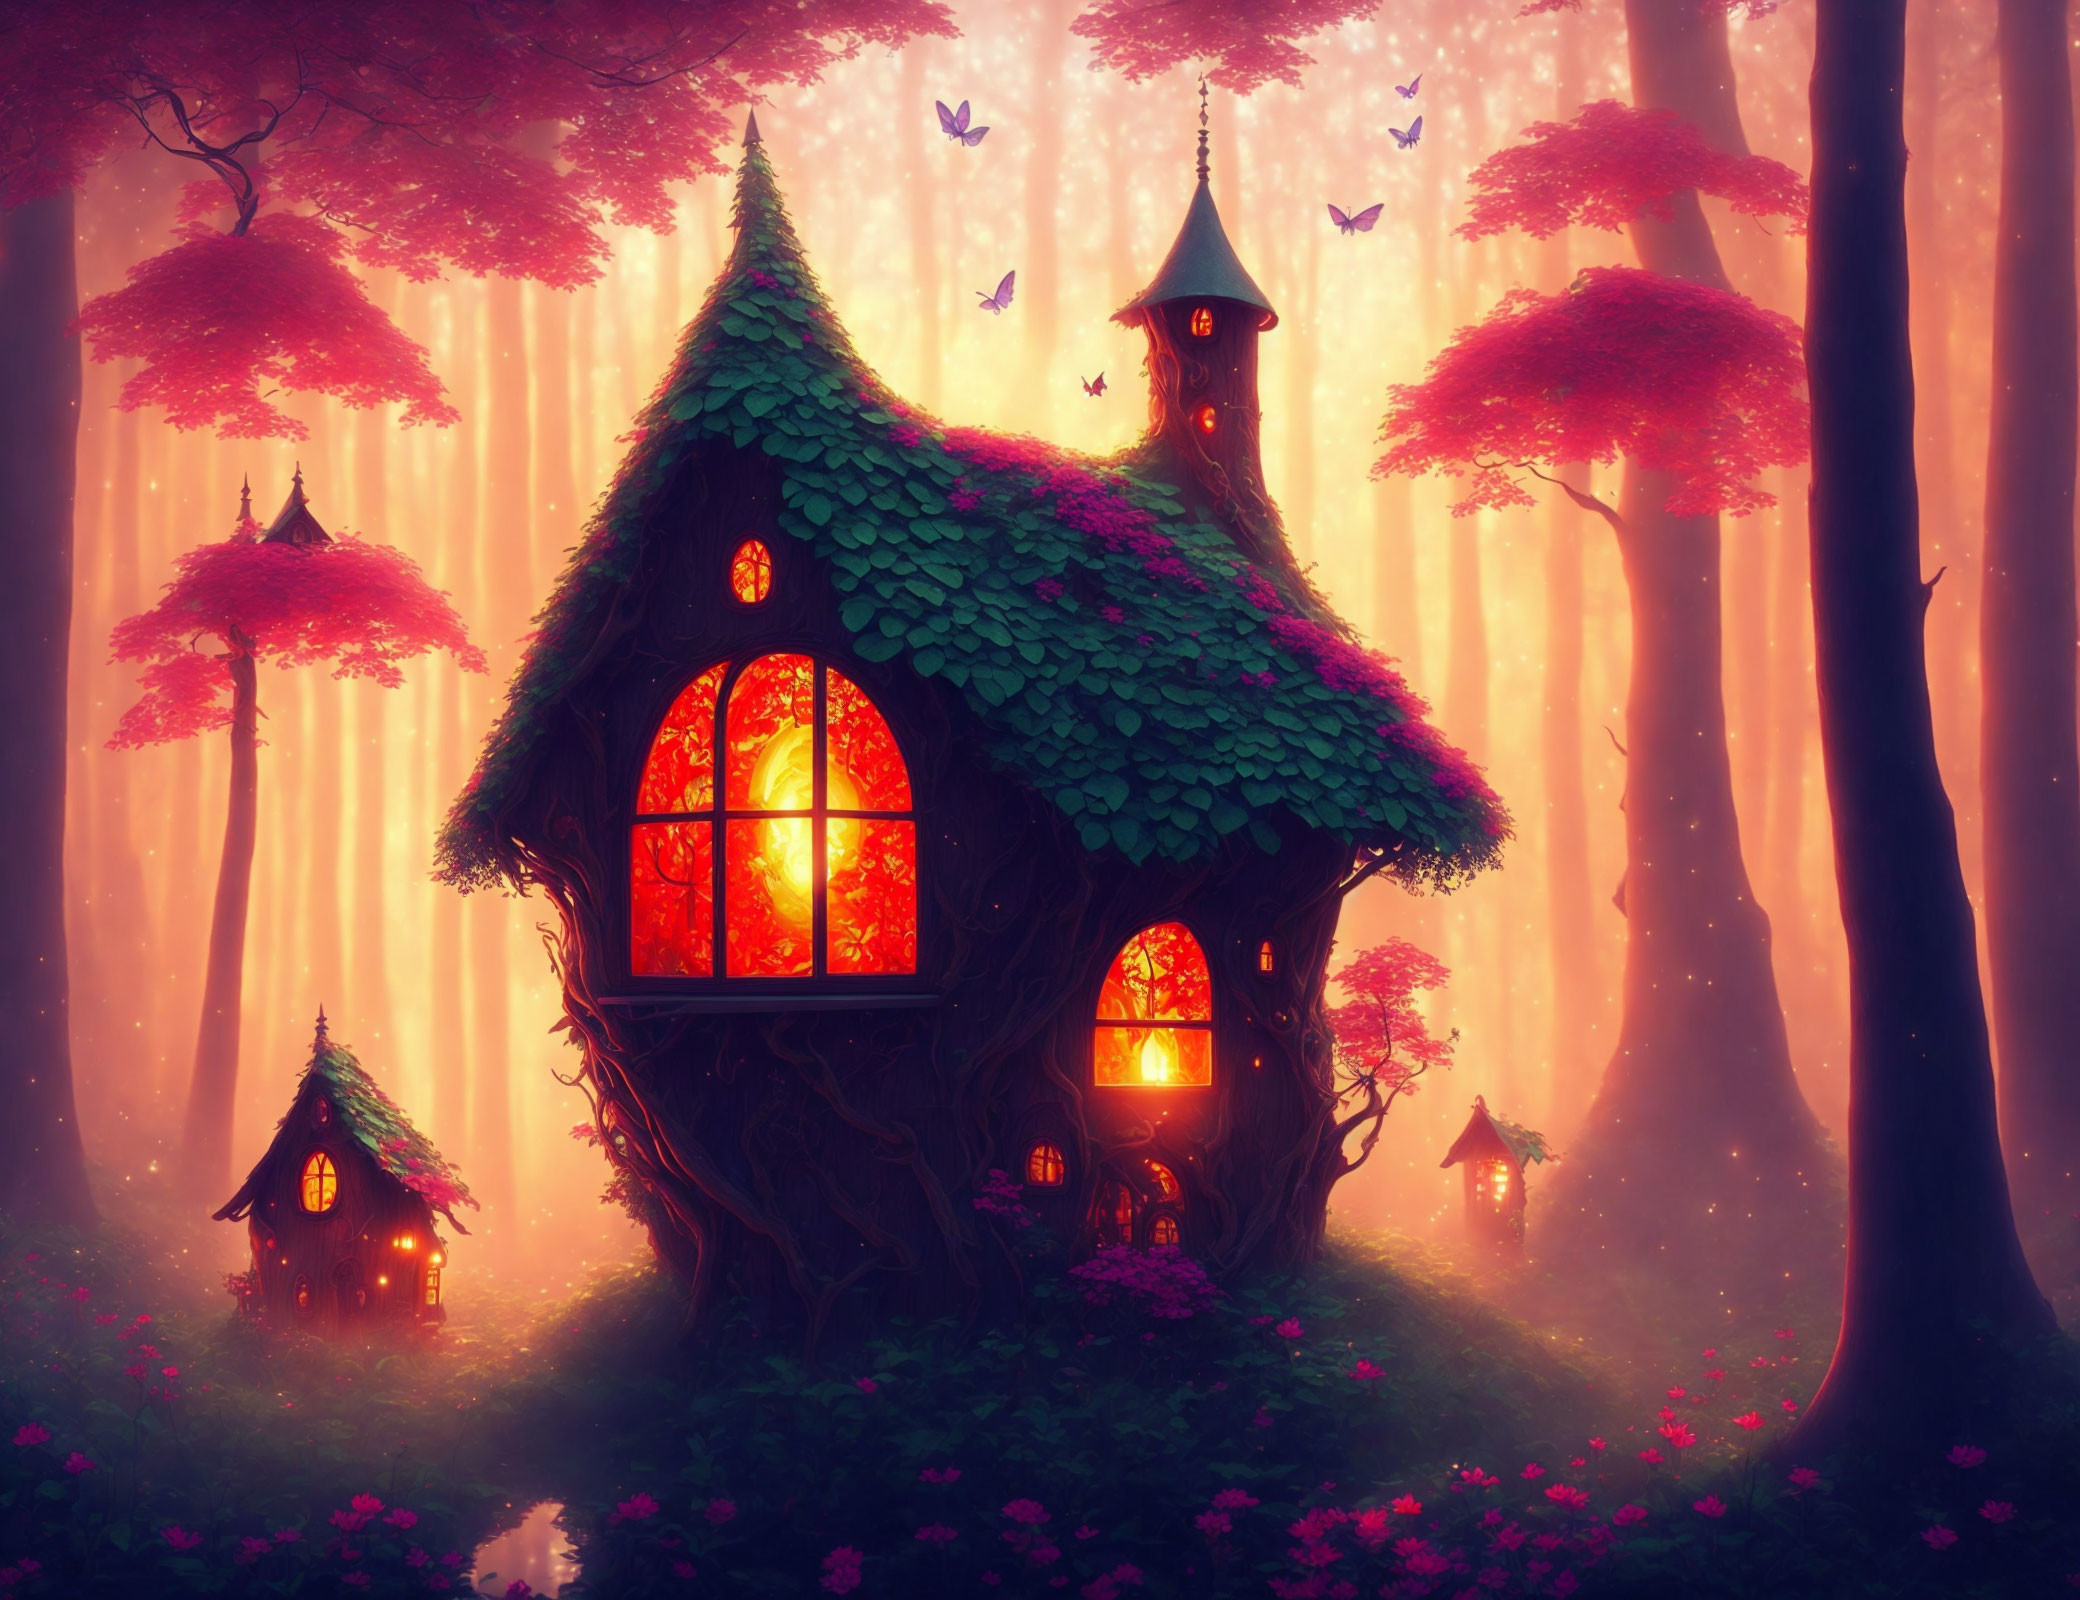 Whimsical house among purple trees in magical forest at dusk